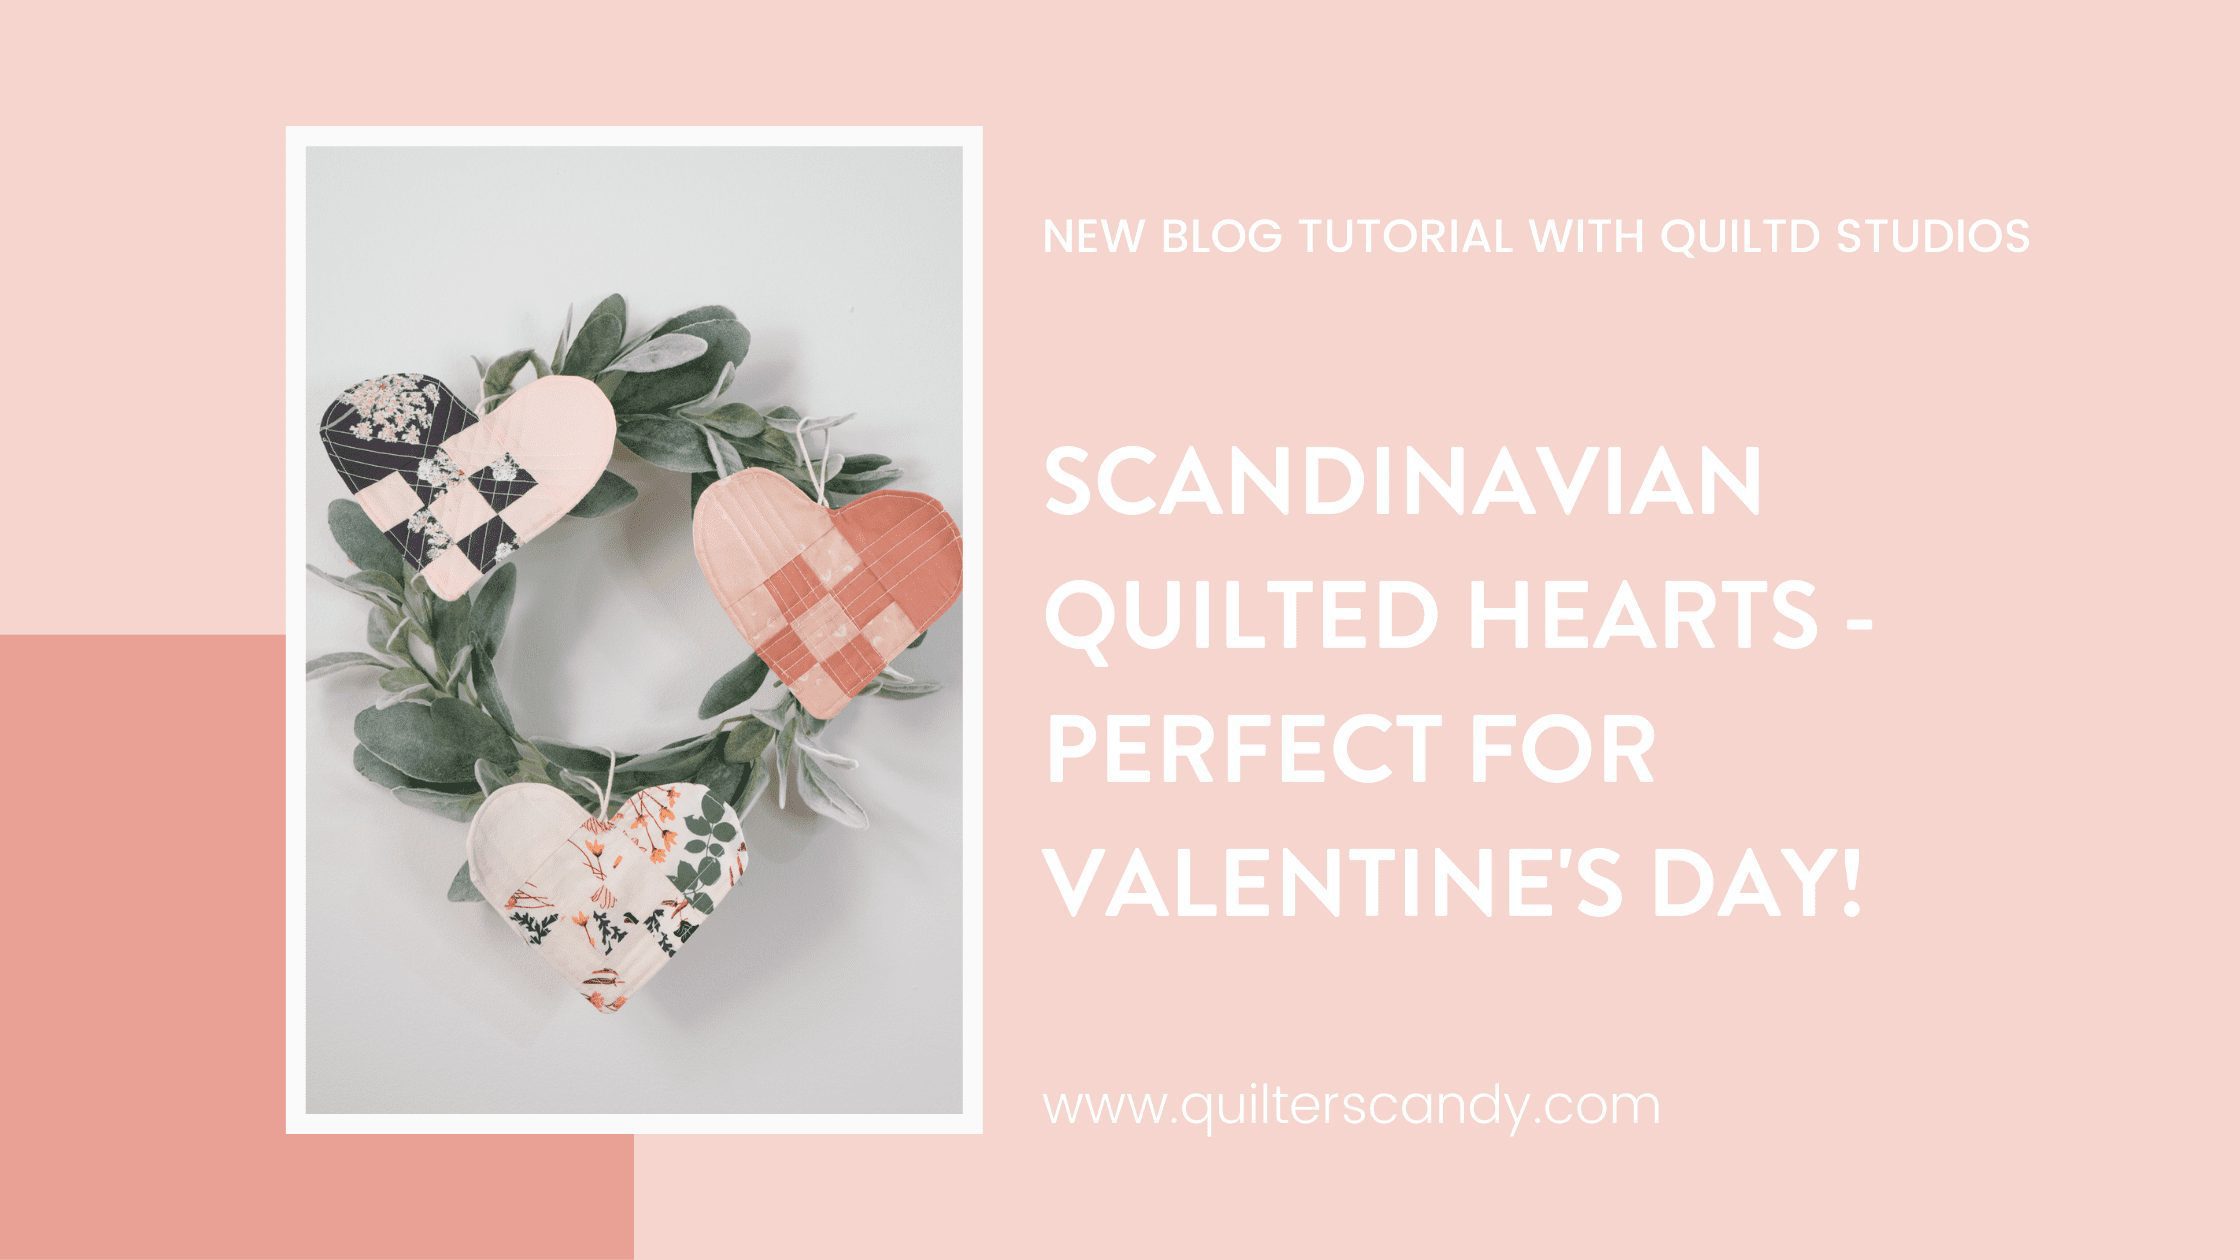 Scandinavian Quilted Hearts - perfect for Valentine's Day!